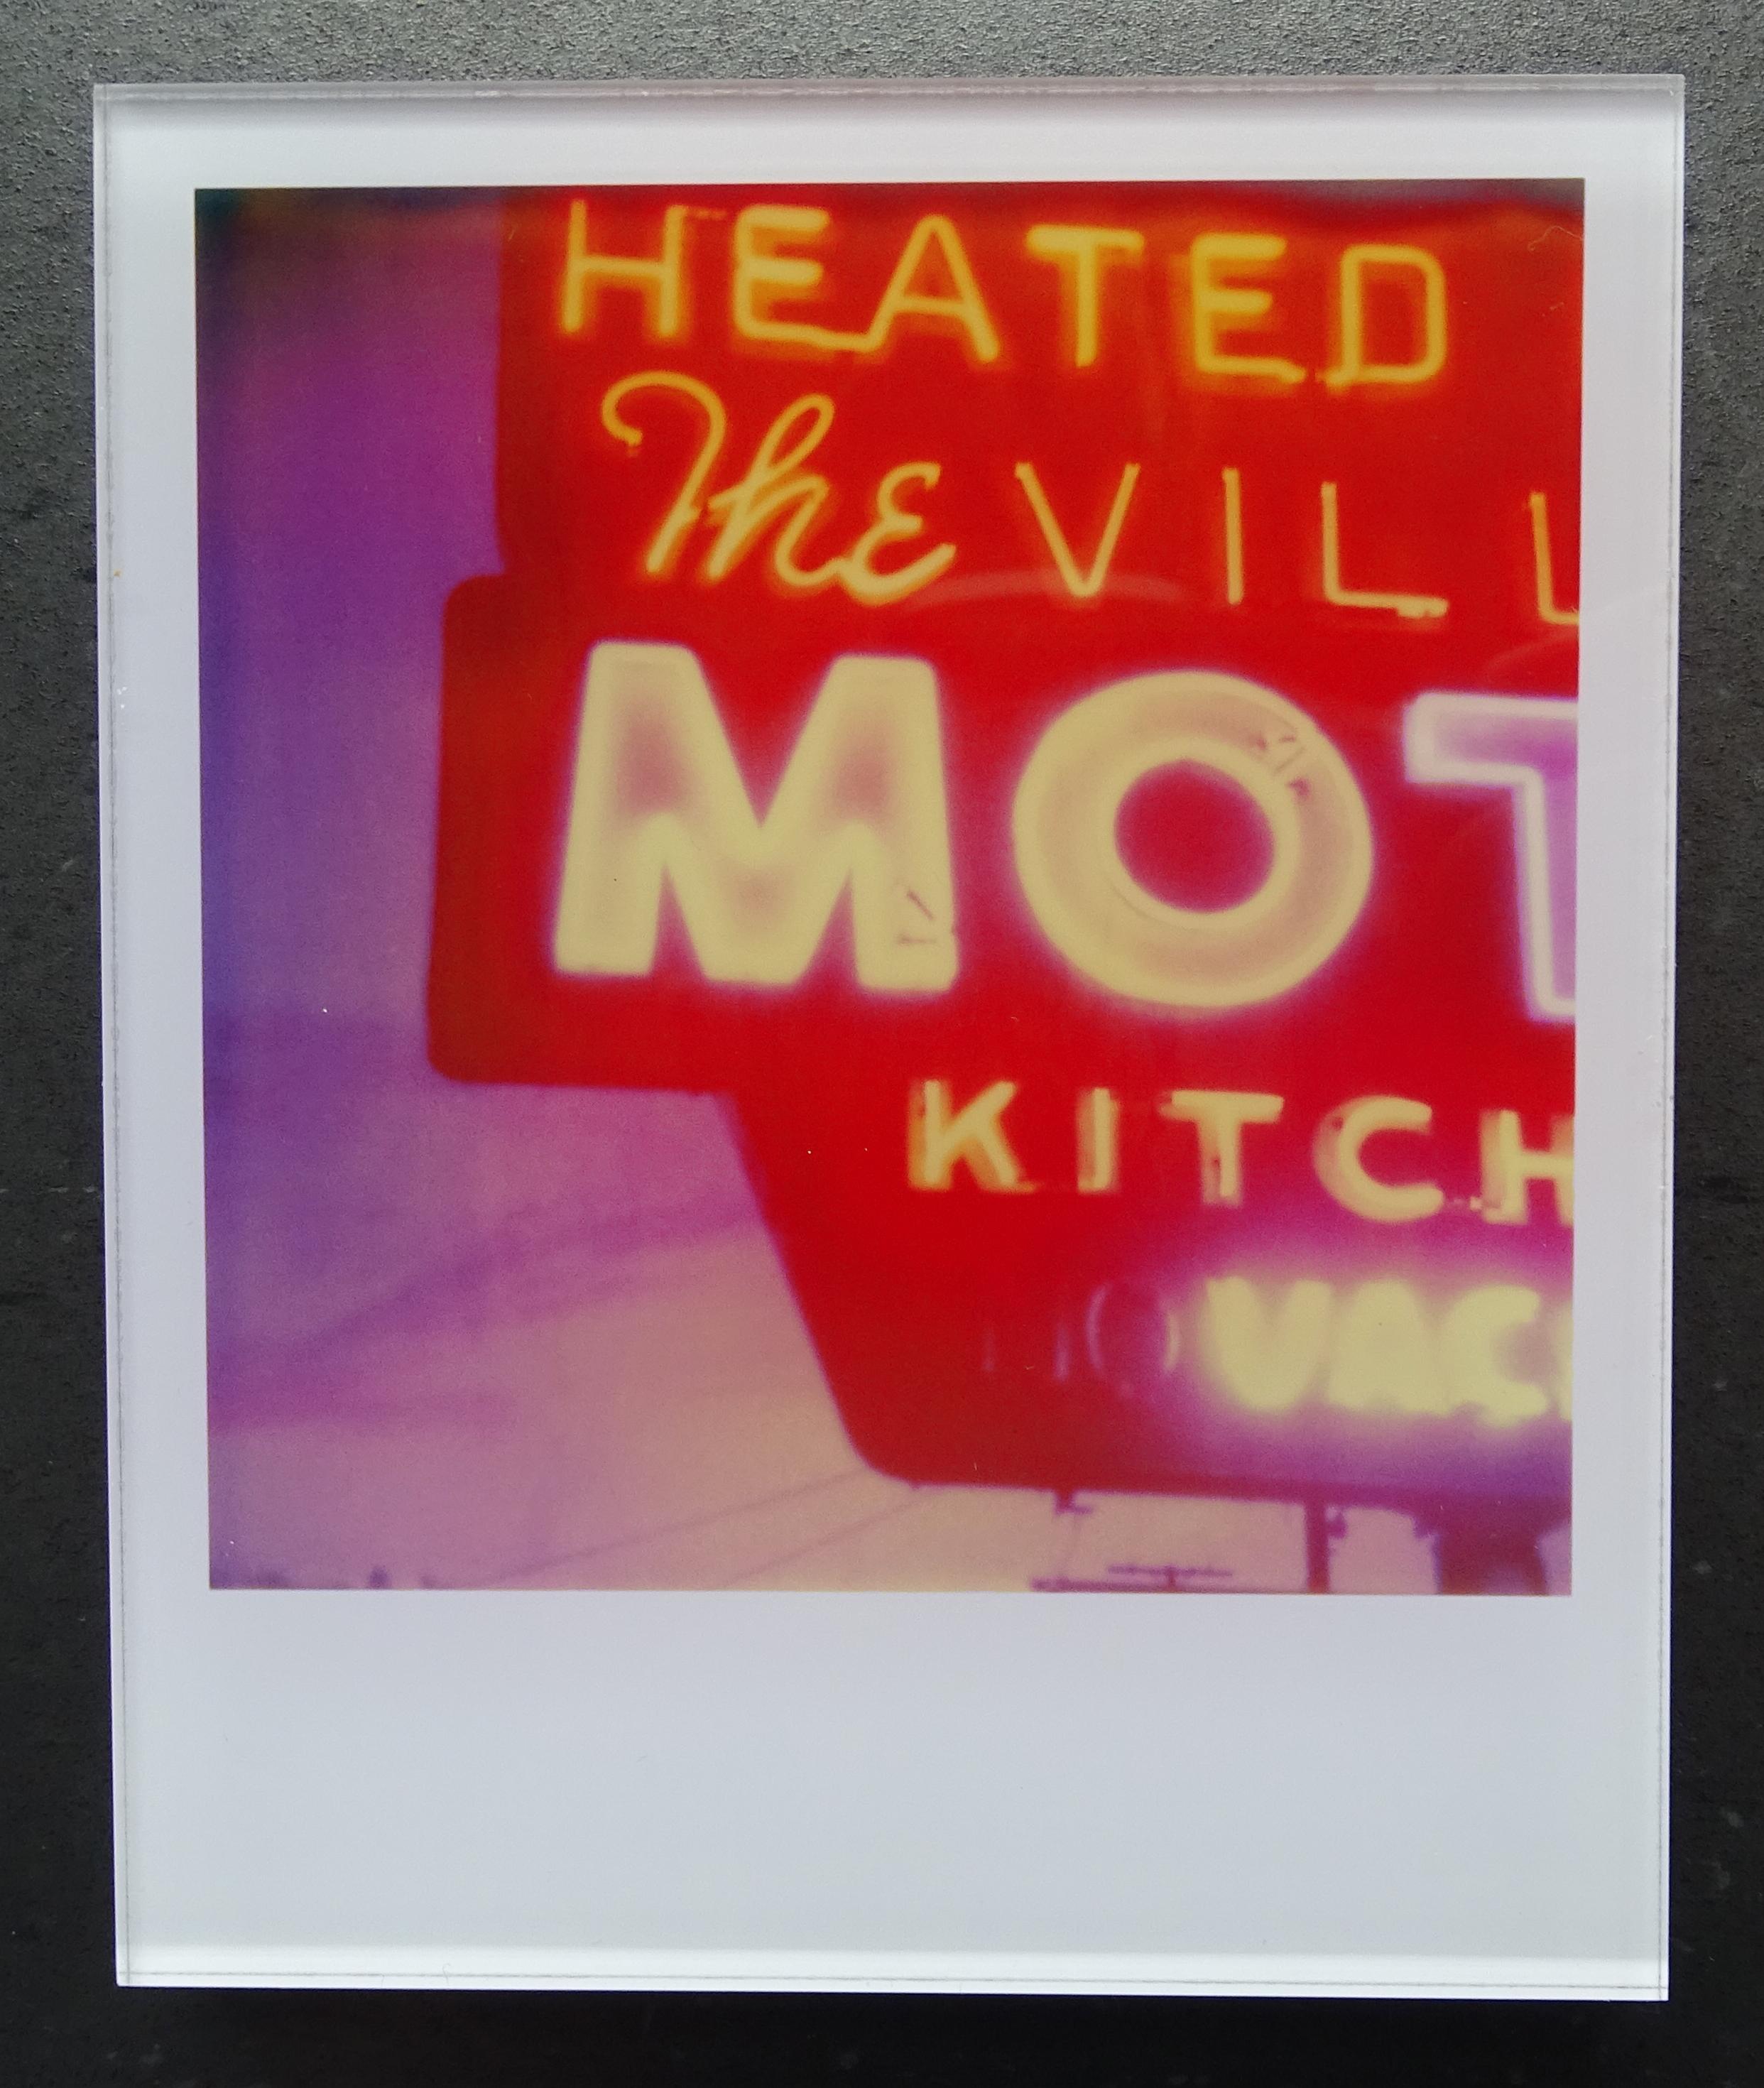 Stefanie Schneider's Minis
Village Motel Sunset (The last Picture Show), 2009

Signed and signature brand on verso.
Lambda digital Color Photographs based on the Polaroid.
Sandwiched in between Plexiglass (thickness 0.7cm)

Polaroid sized open